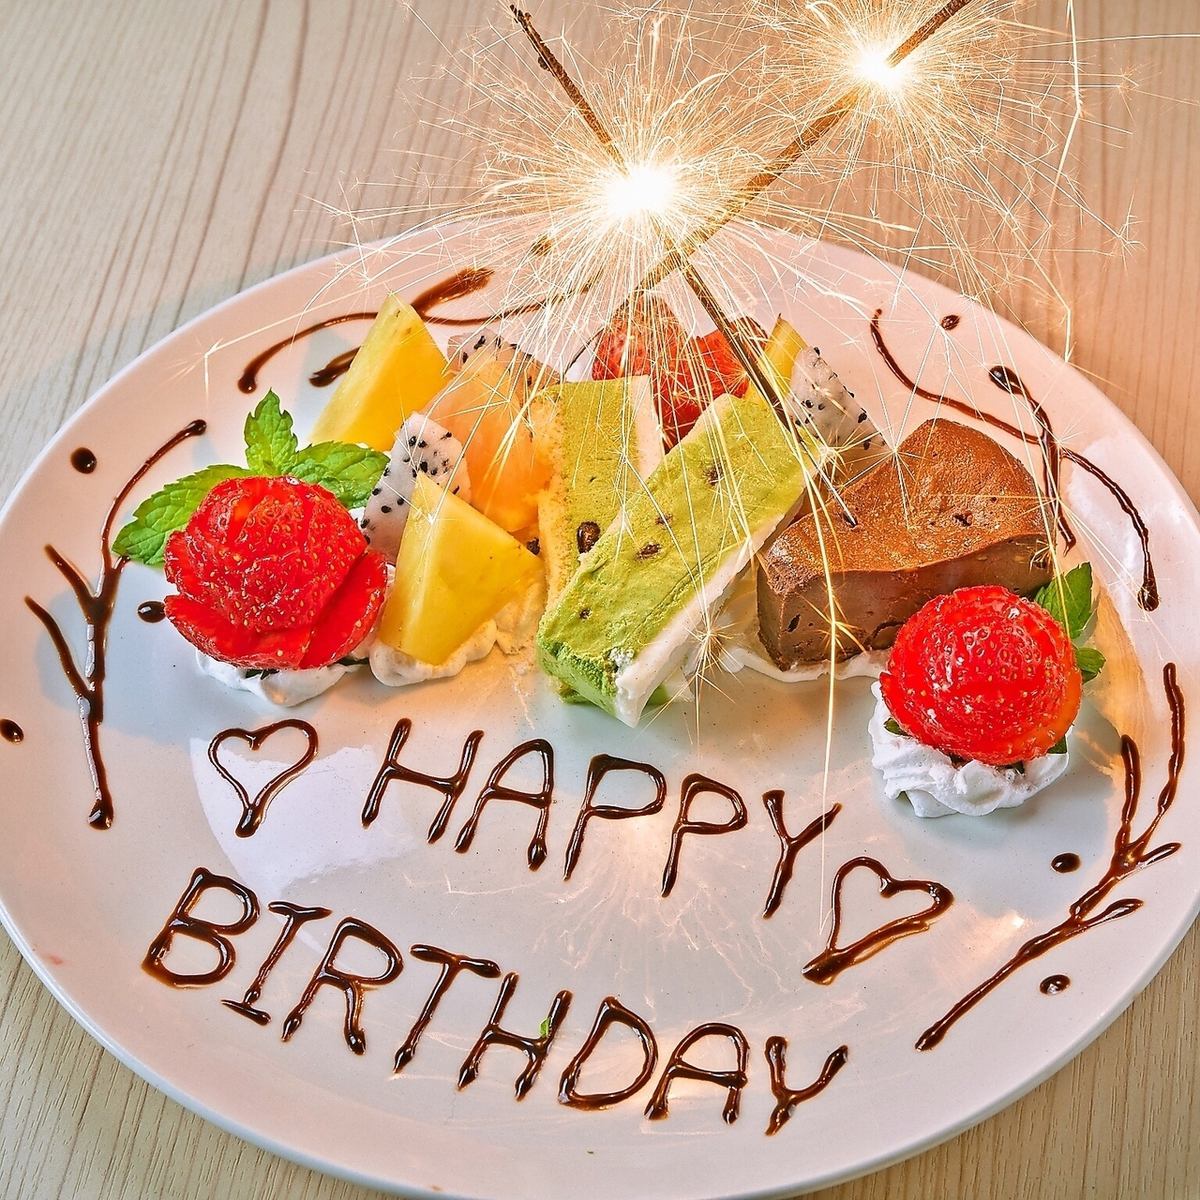 Same-day OK♪Free message plate★Staff will support your celebration!